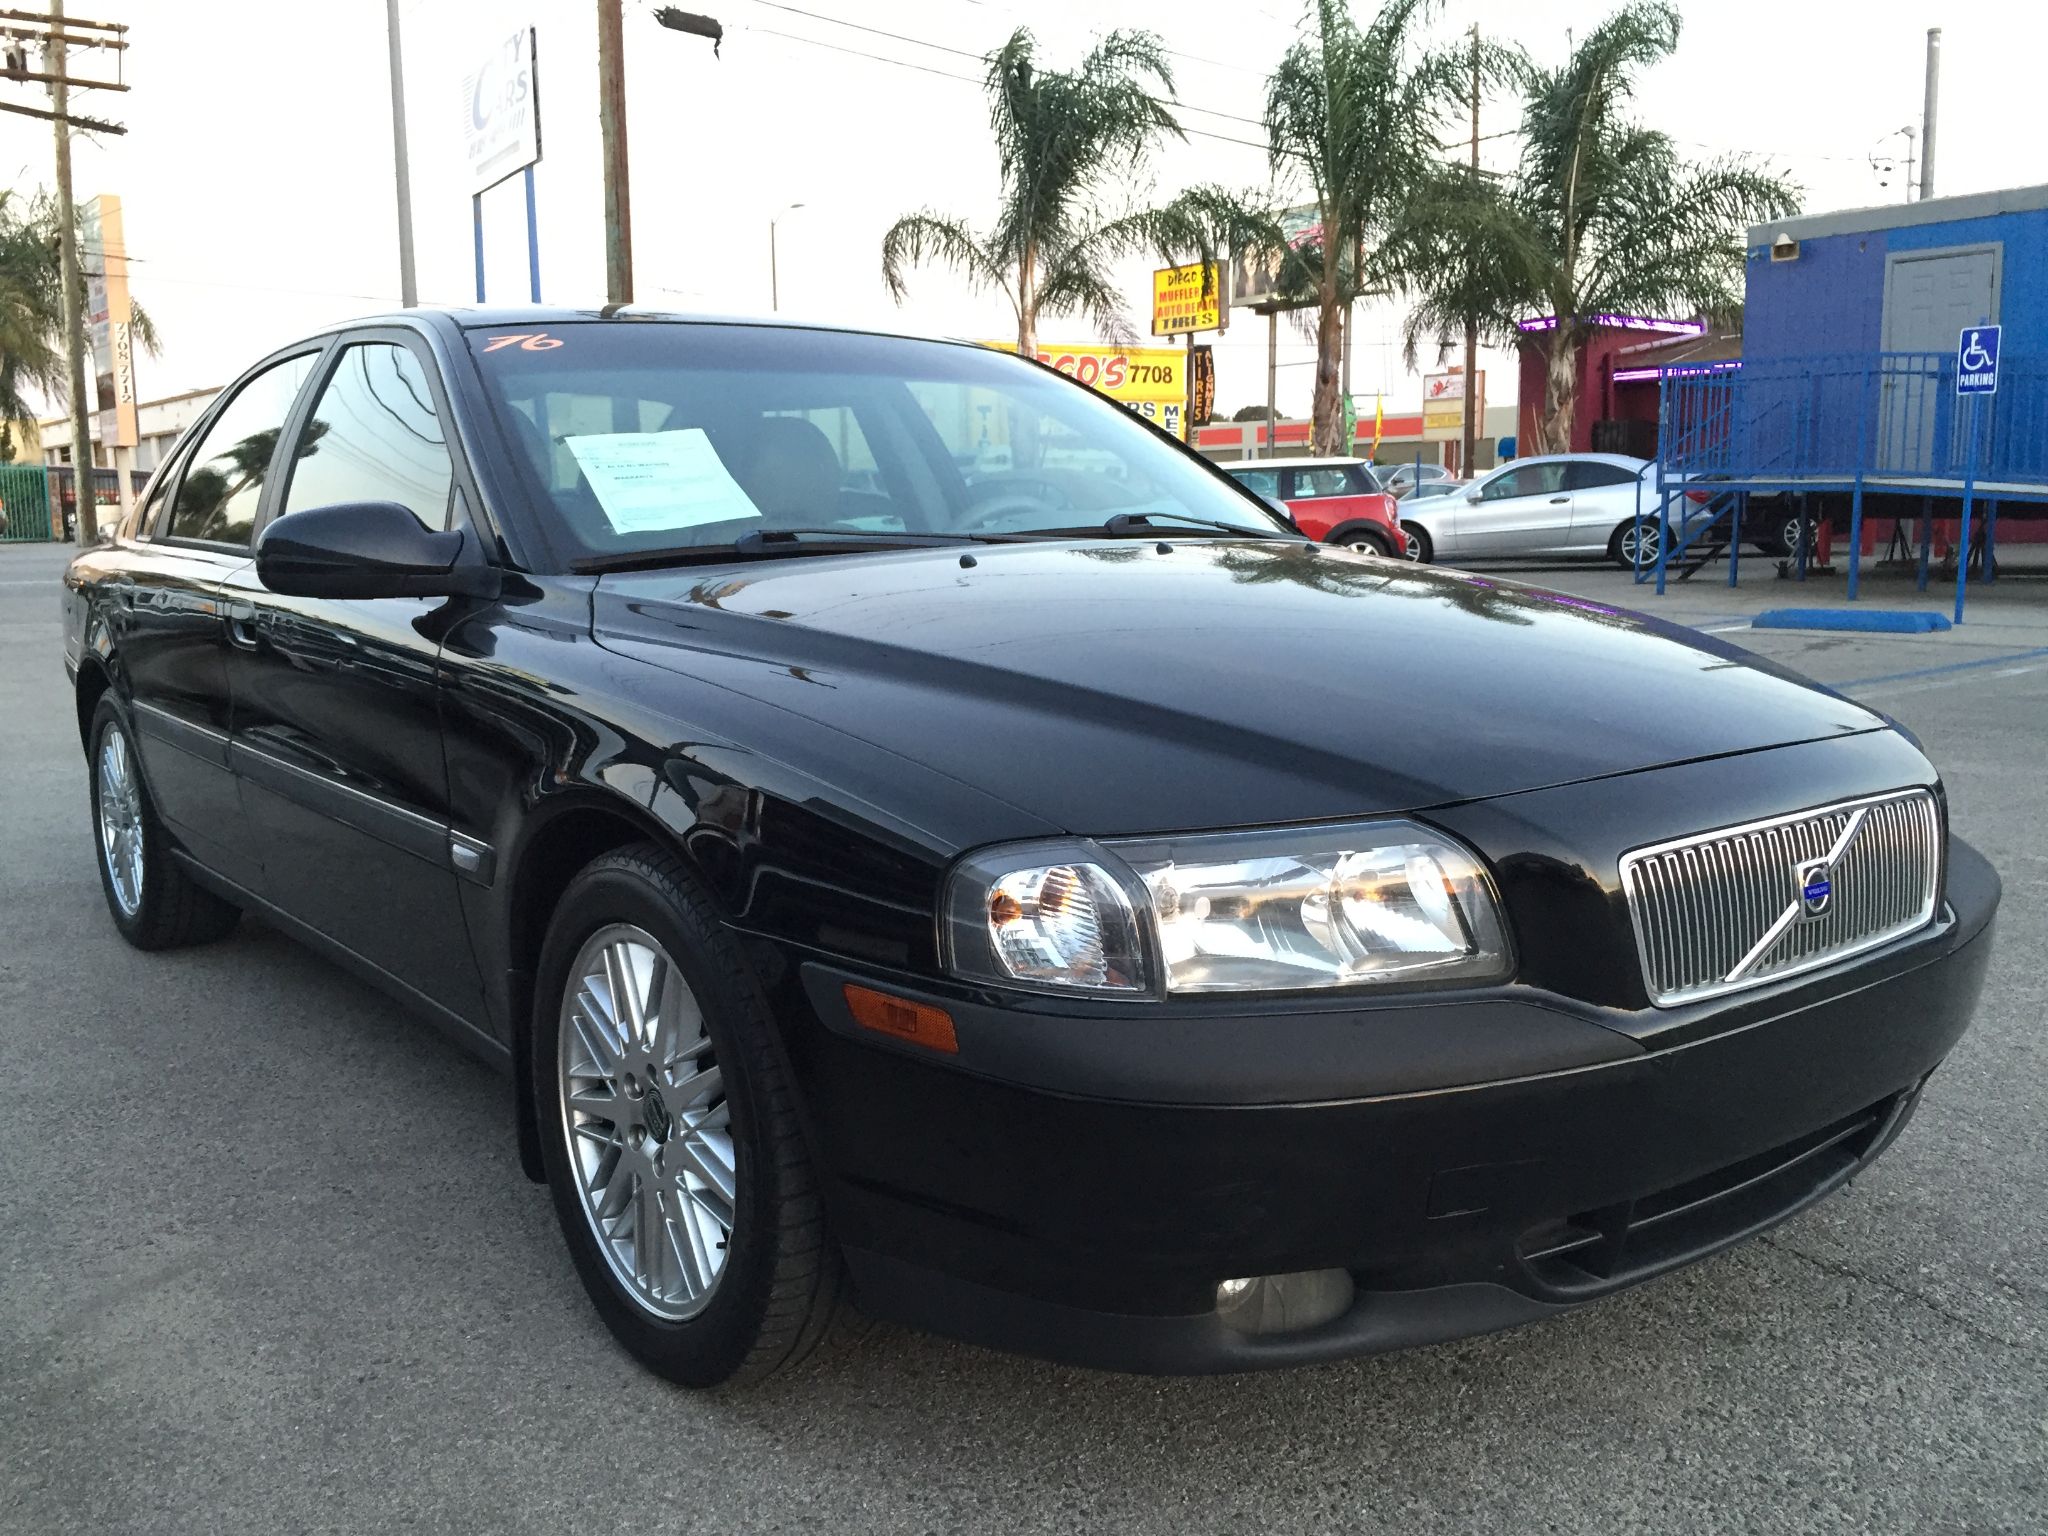 Used 2002 Volvo S80 T6 at City Cars Warehouse INC